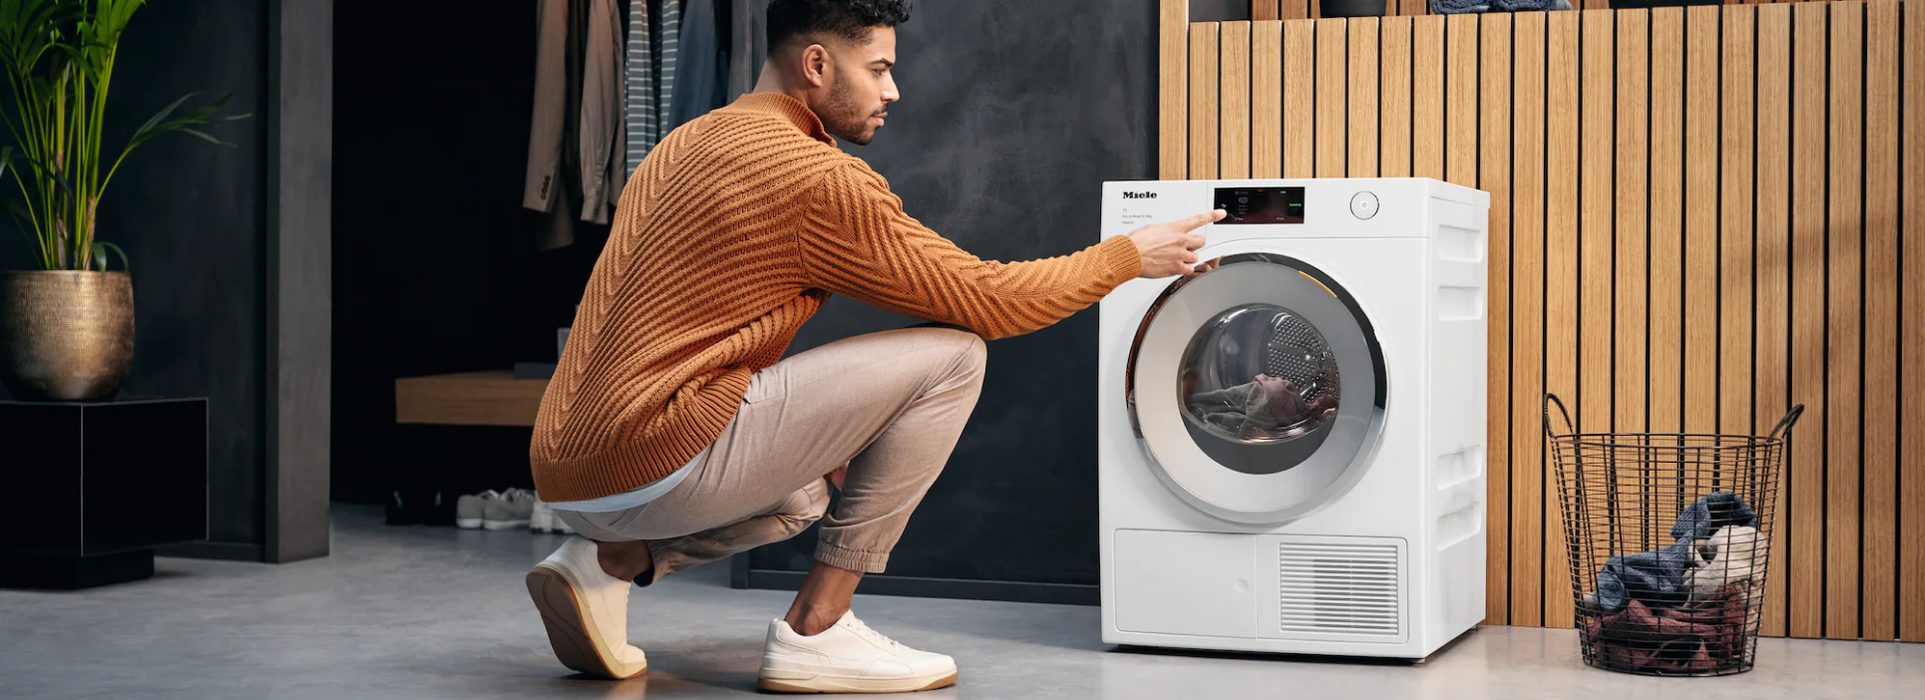 Best Smart Washing Machine For an Energy-Efficient Home in 2023